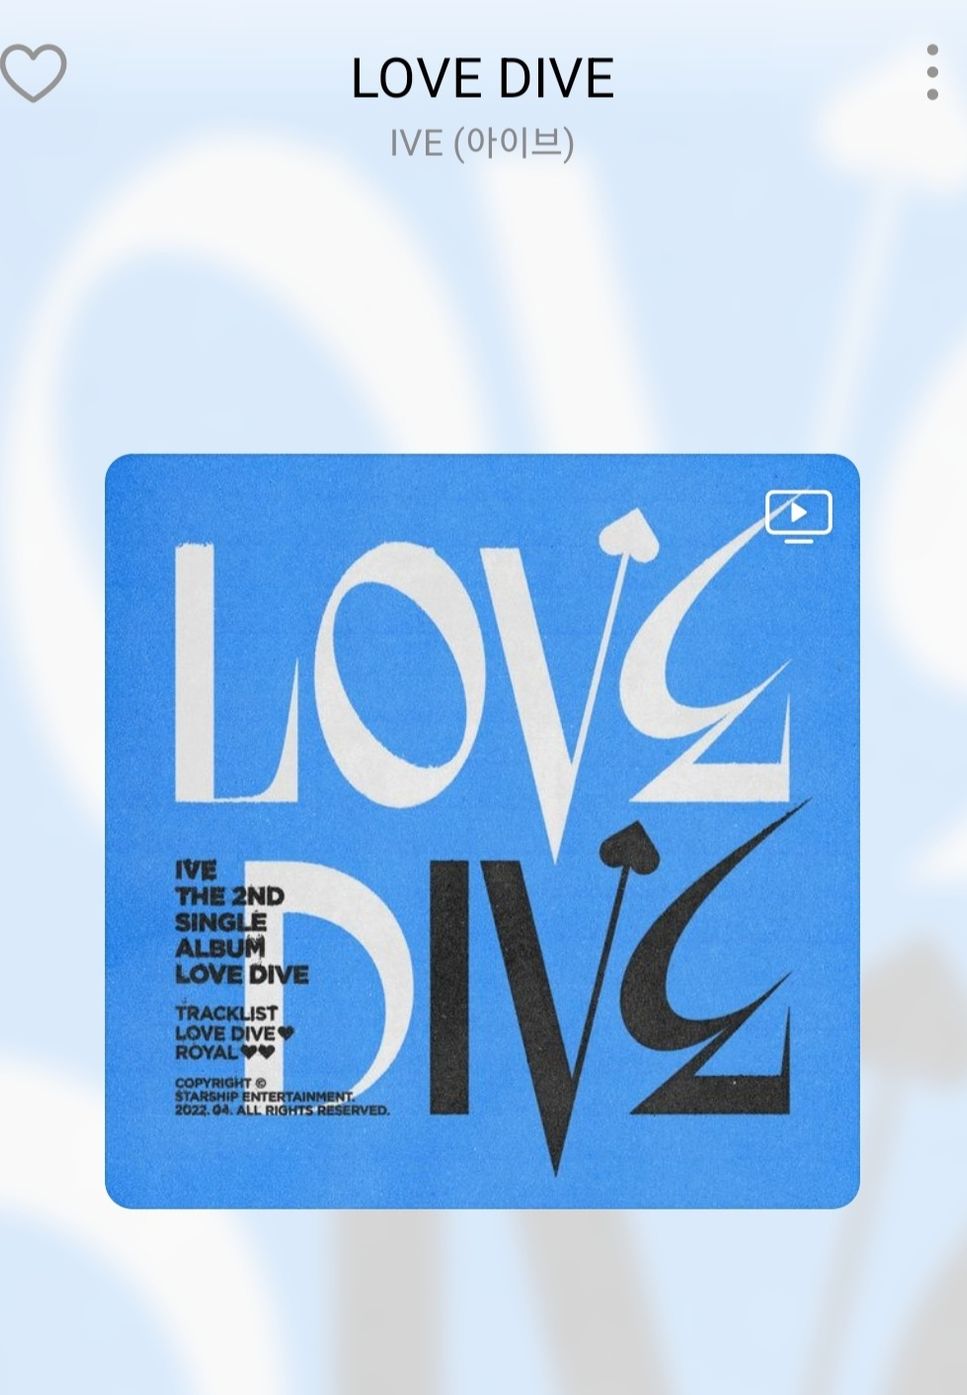 IVE - love dive by 구우리